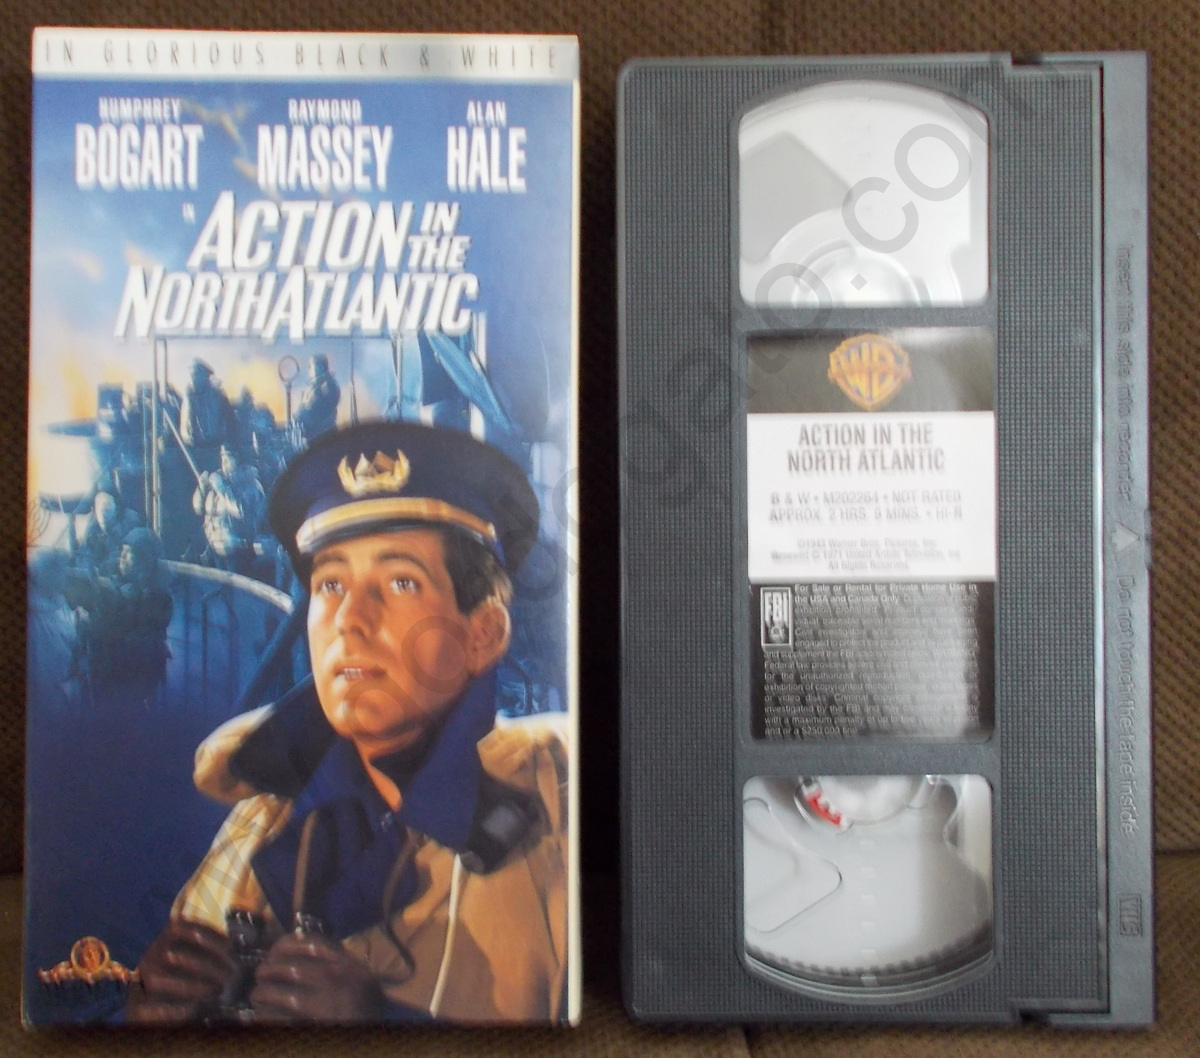 Action in the North Atlantic (VHS, 1991)